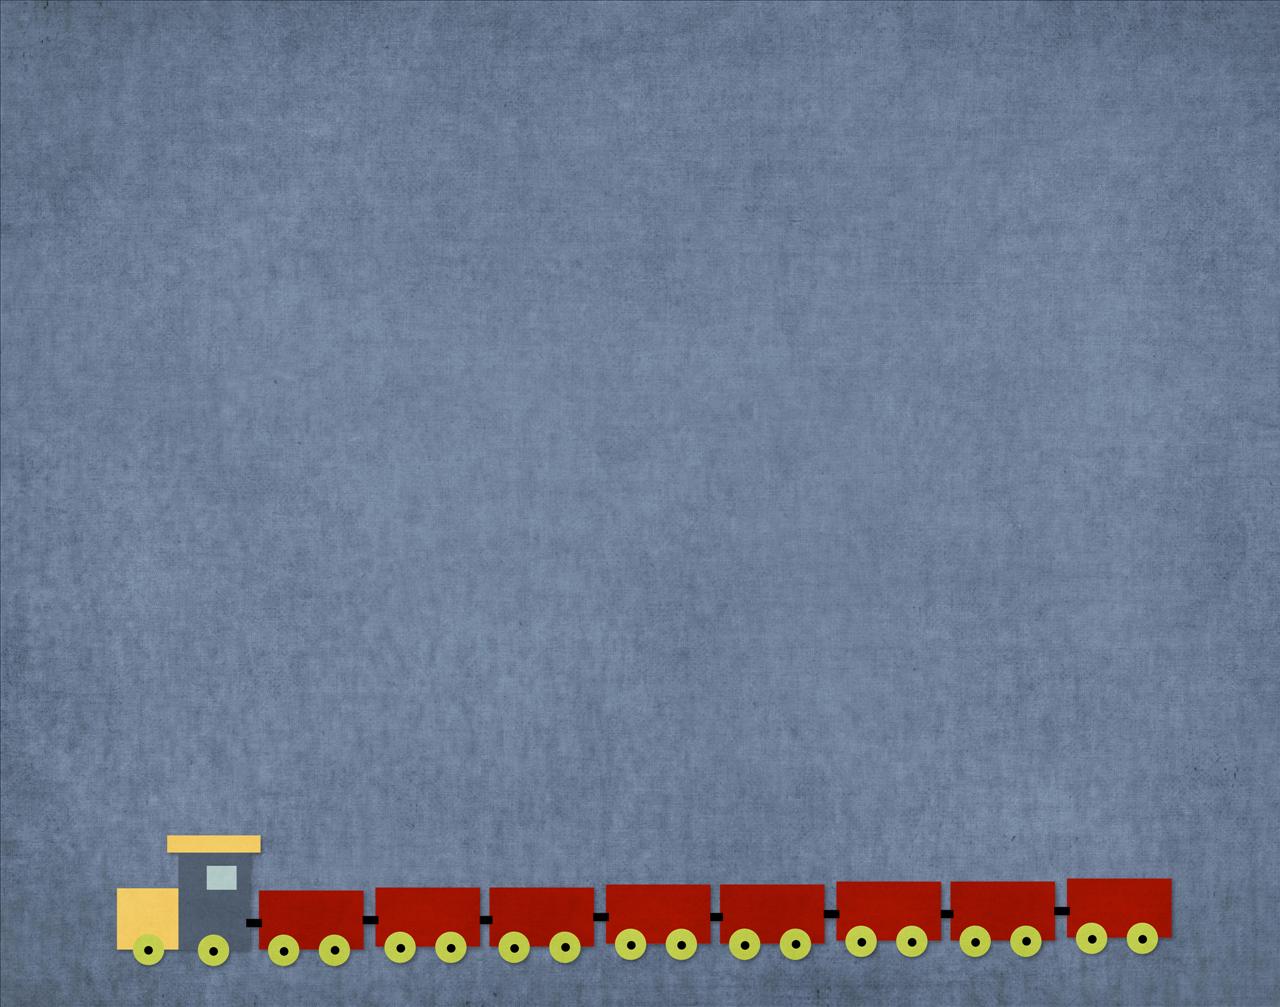 Train on Blue - Go Go Go Backgrounds powerpoint backgrounds